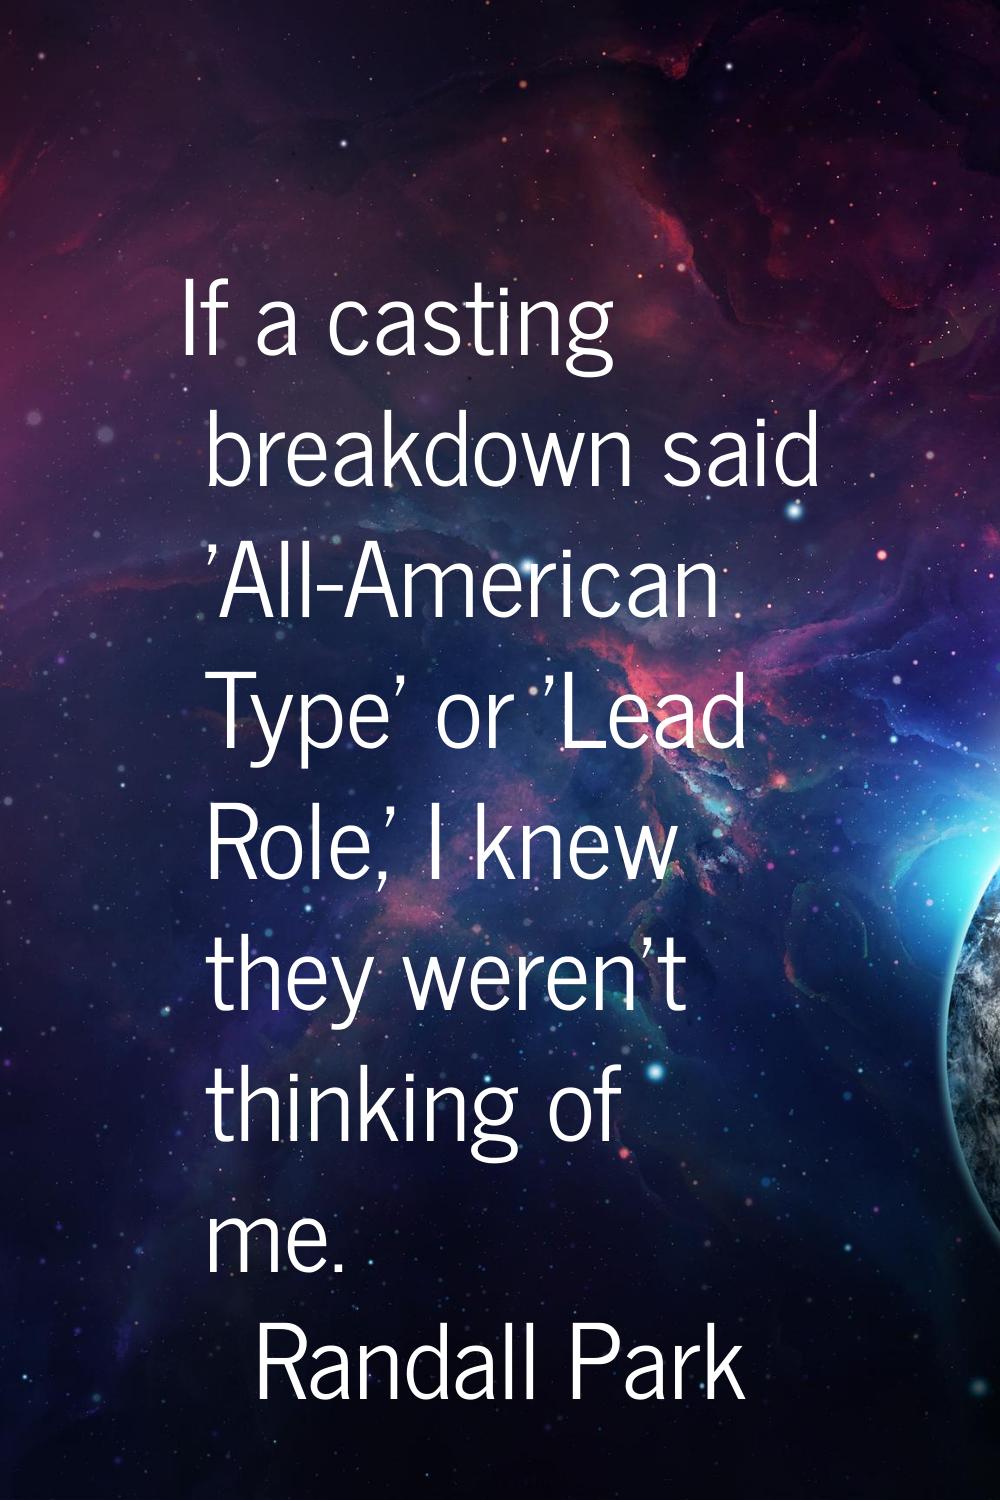 If a casting breakdown said 'All-American Type' or 'Lead Role,' I knew they weren't thinking of me.